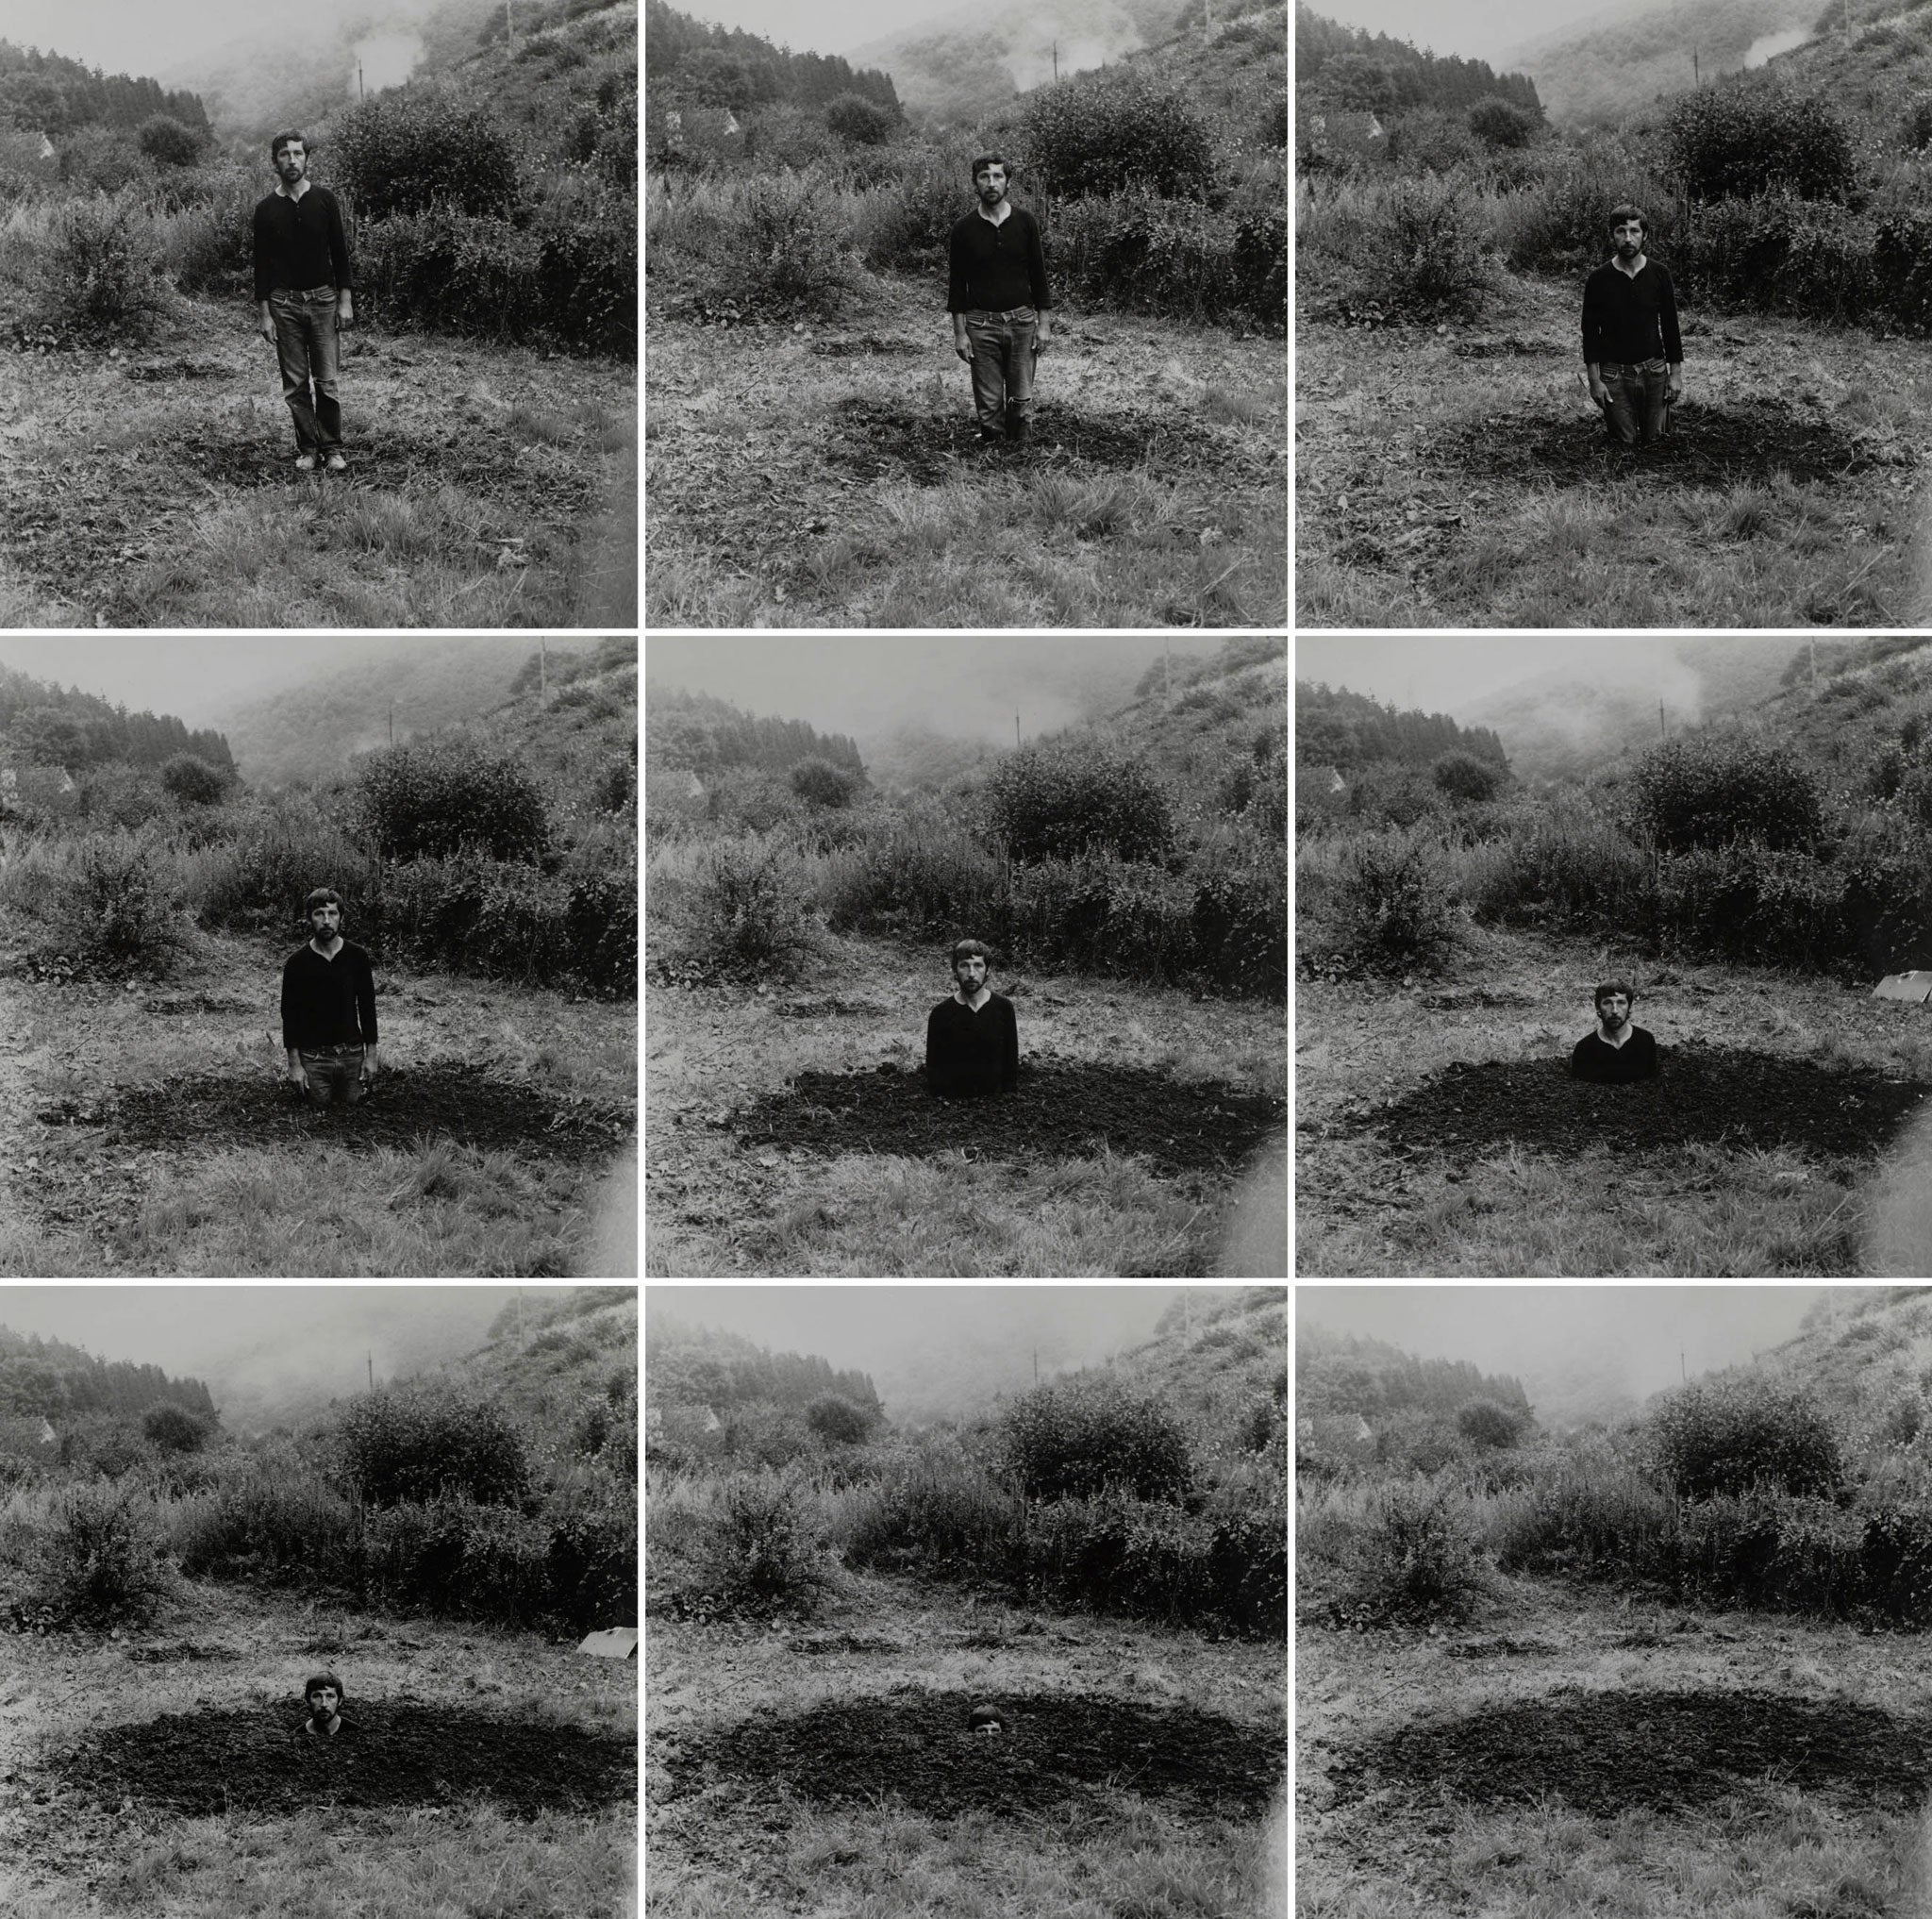 Included in a new exhibition about Arnatt is his 1969 self-portrait series 'Self-Burial'